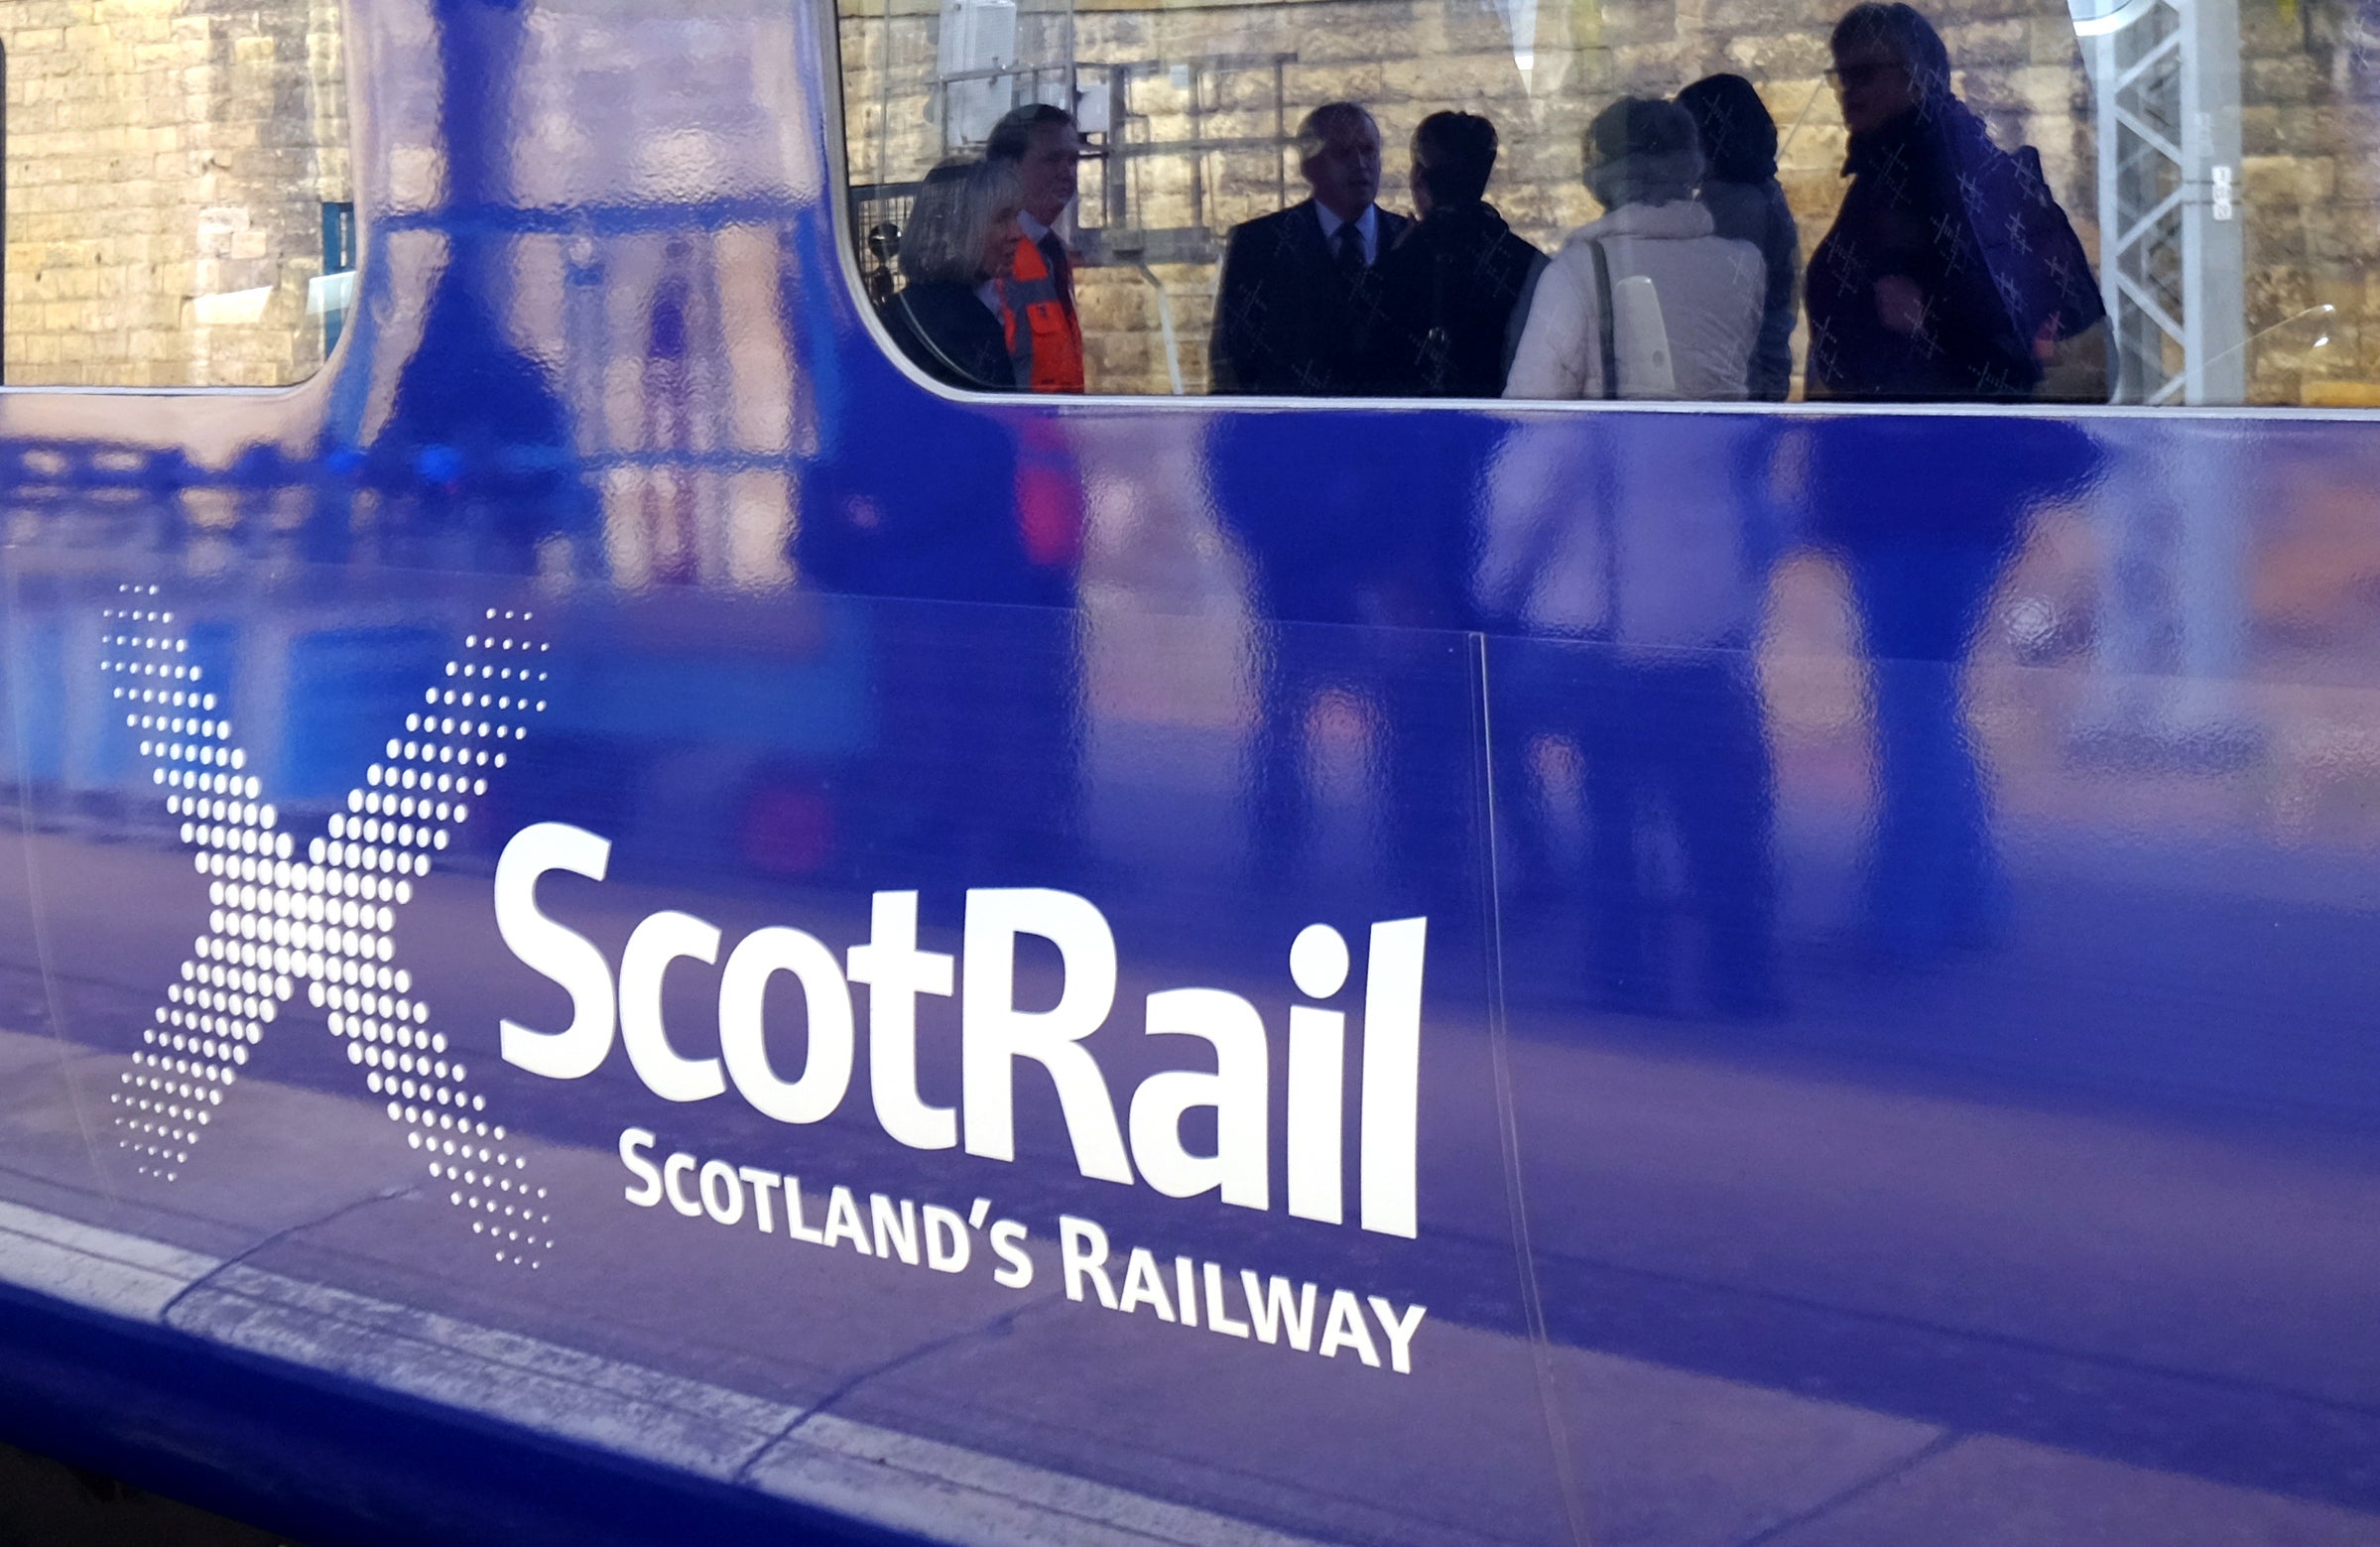 A ScotRail driver spotted two people in the River Clyde, and stopped the train to help save them (Jane Barlow/PA)